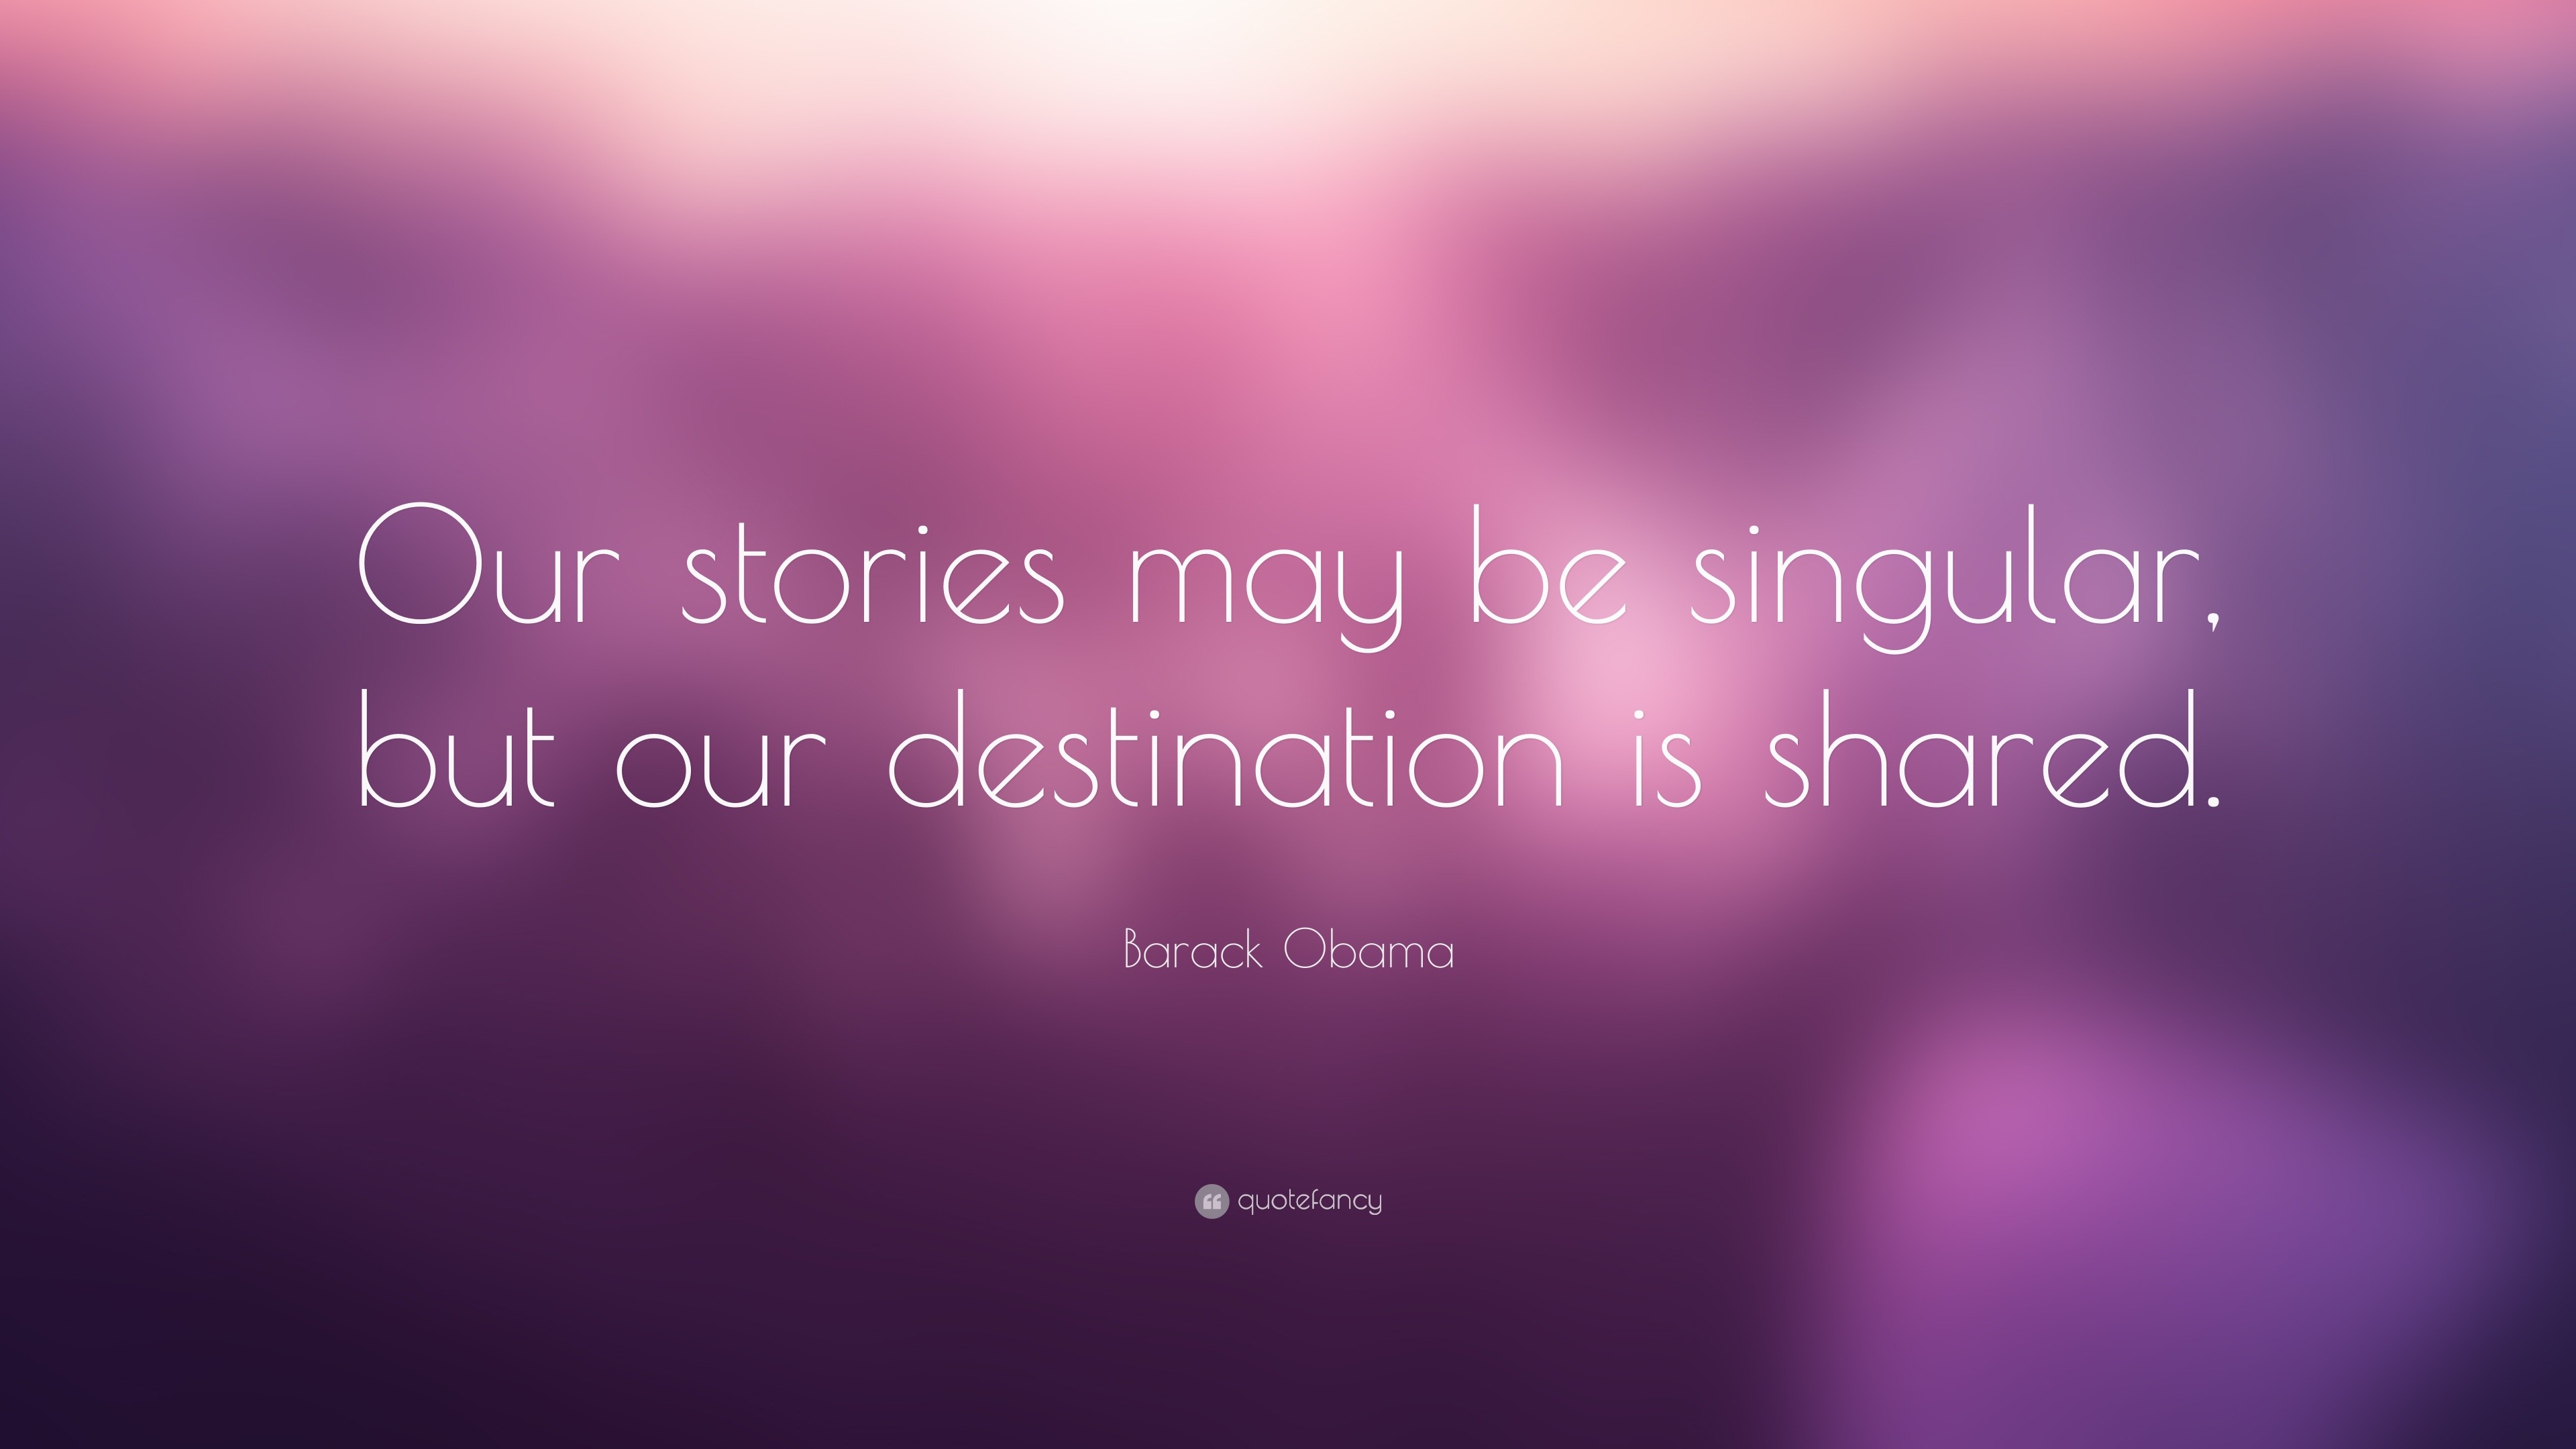 Barack Obama Quote: “Our stories may be singular, but our destination ...